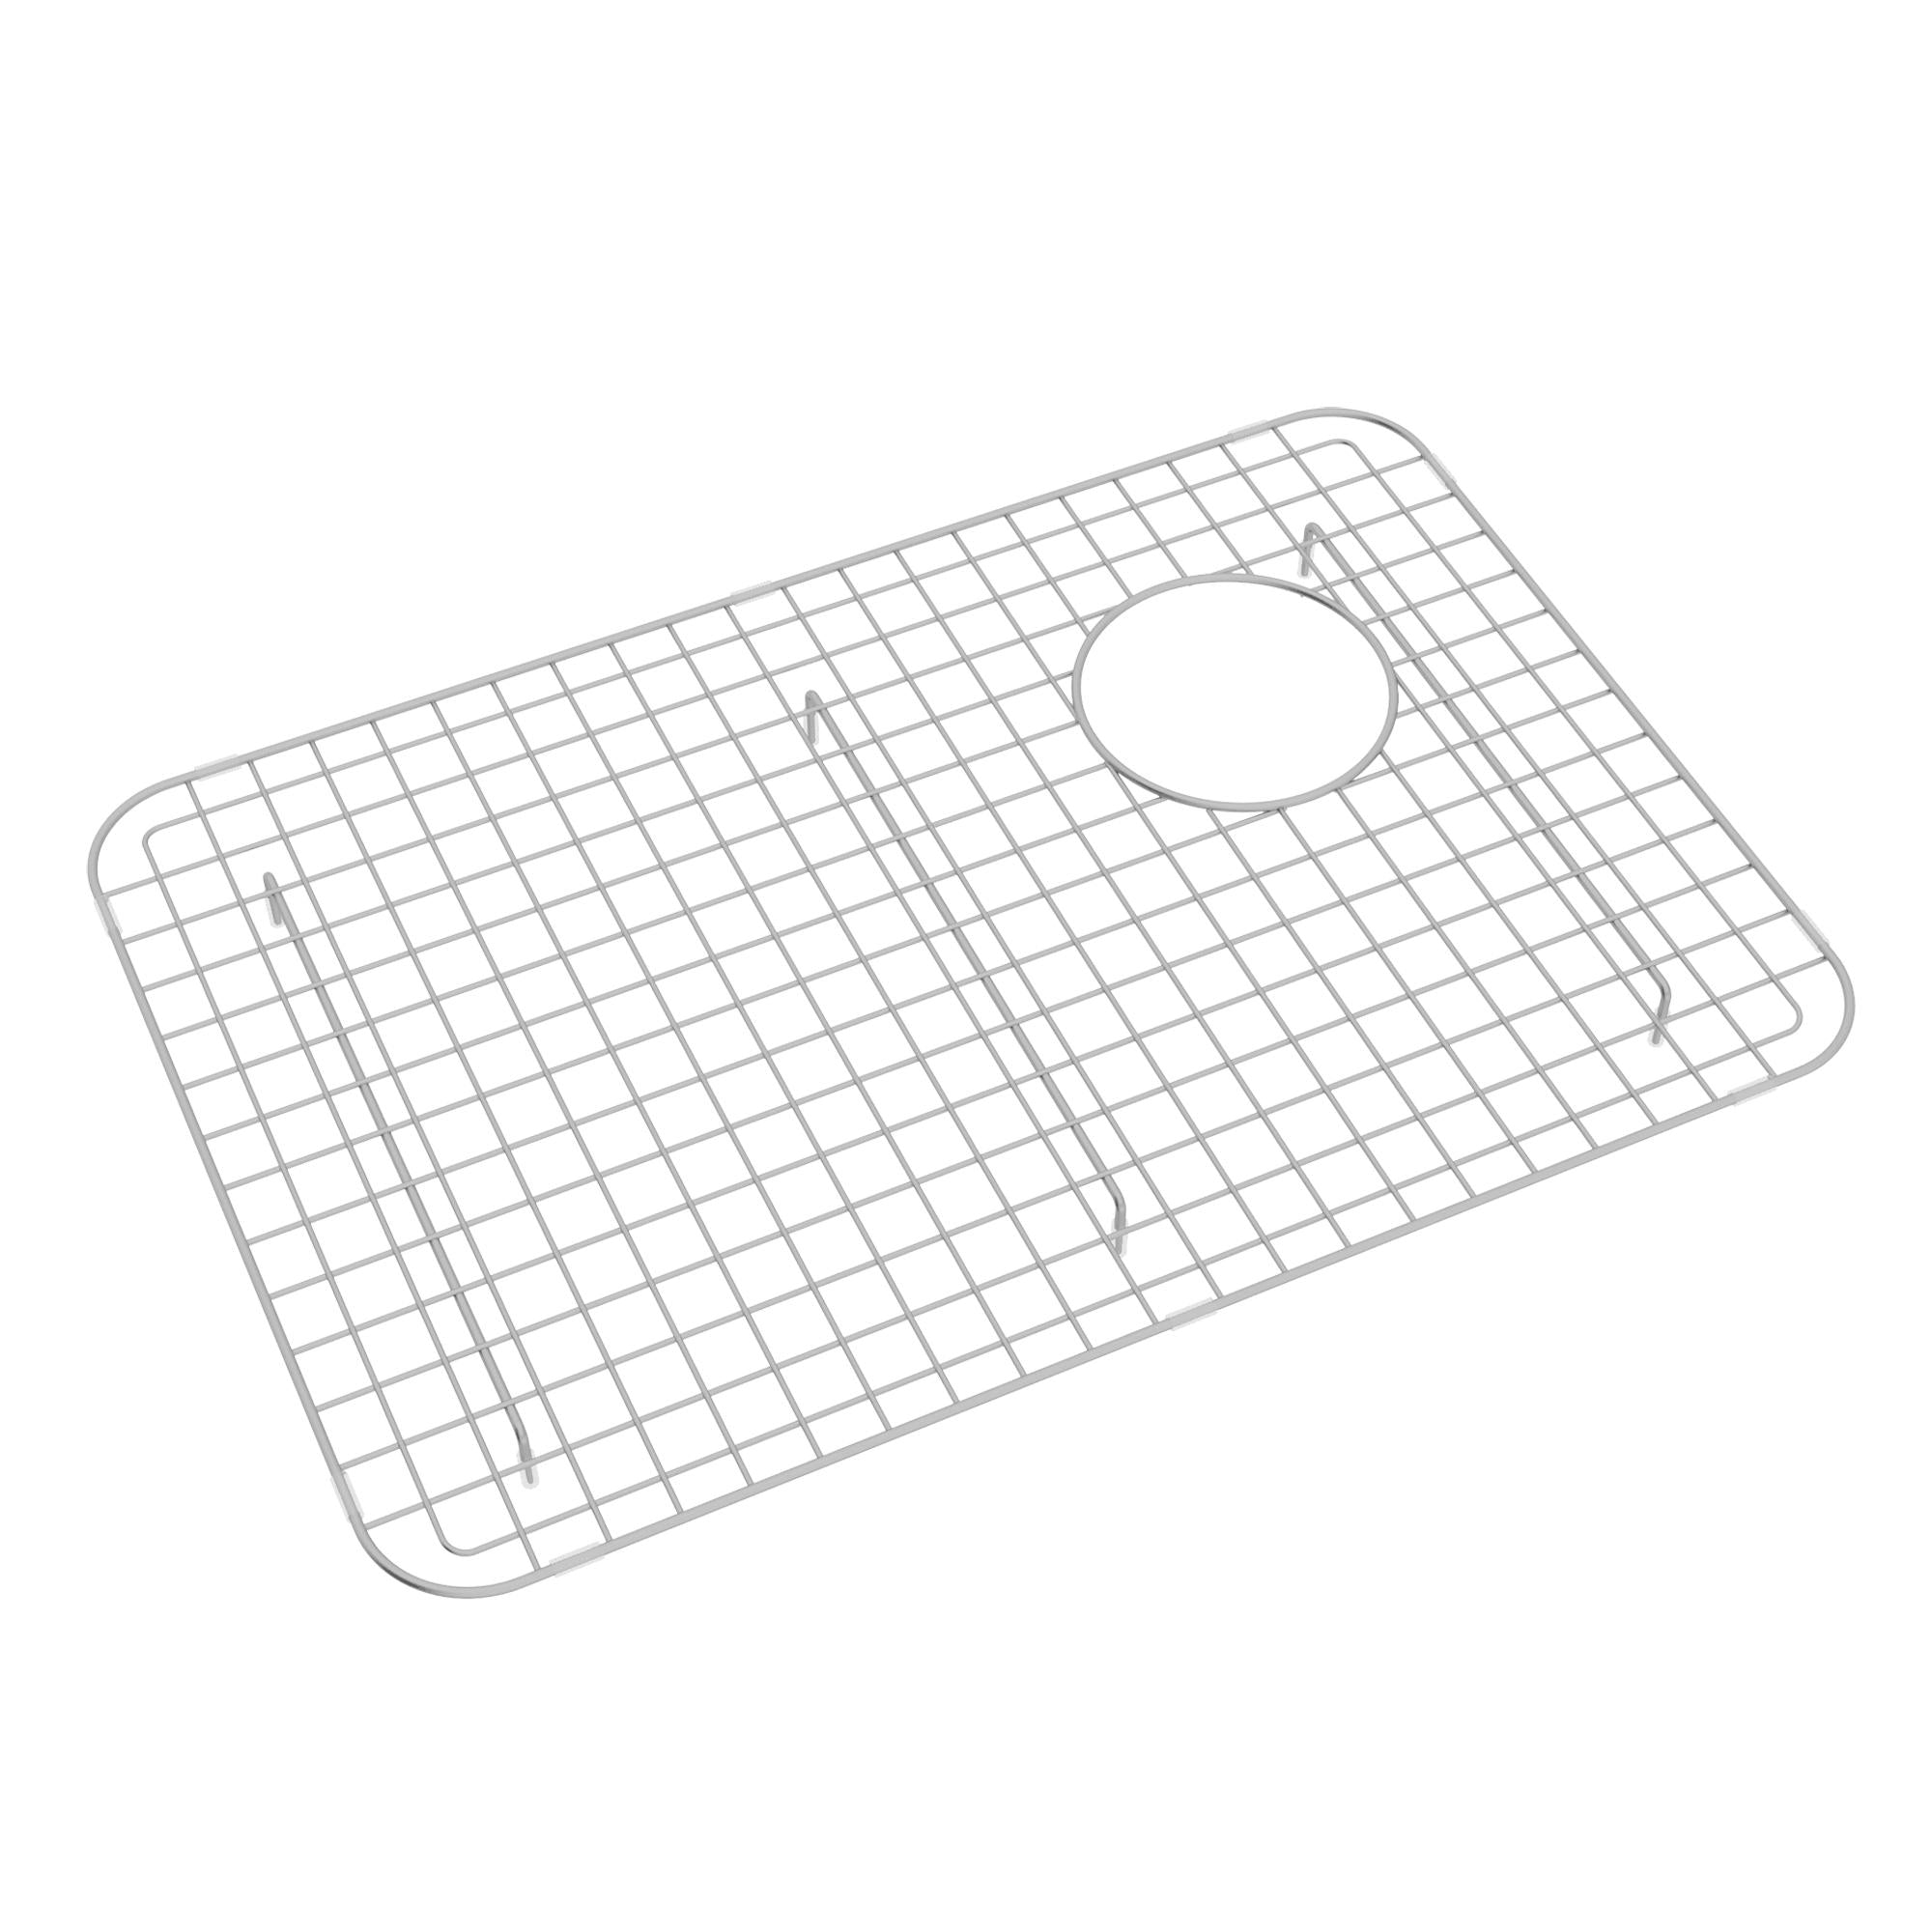 Shaws WSG4019LG Wire Sink Grid For RC4019 & RC4018 Kitchen Sinks Large Bowl